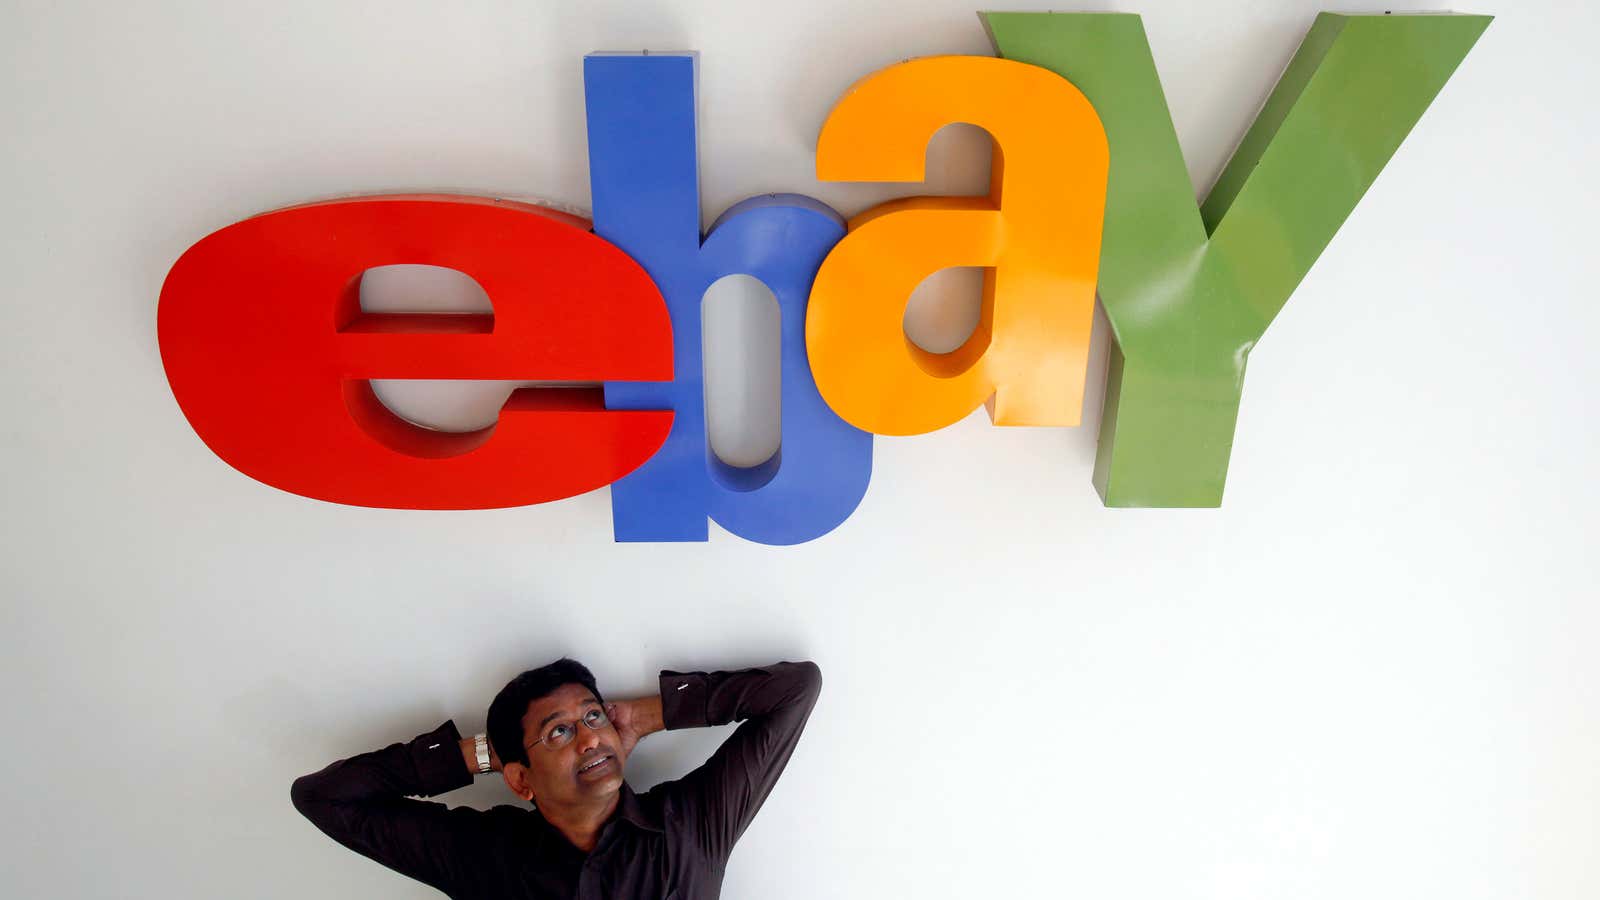 E-Bay is rousting the cash it earns in markets like India.